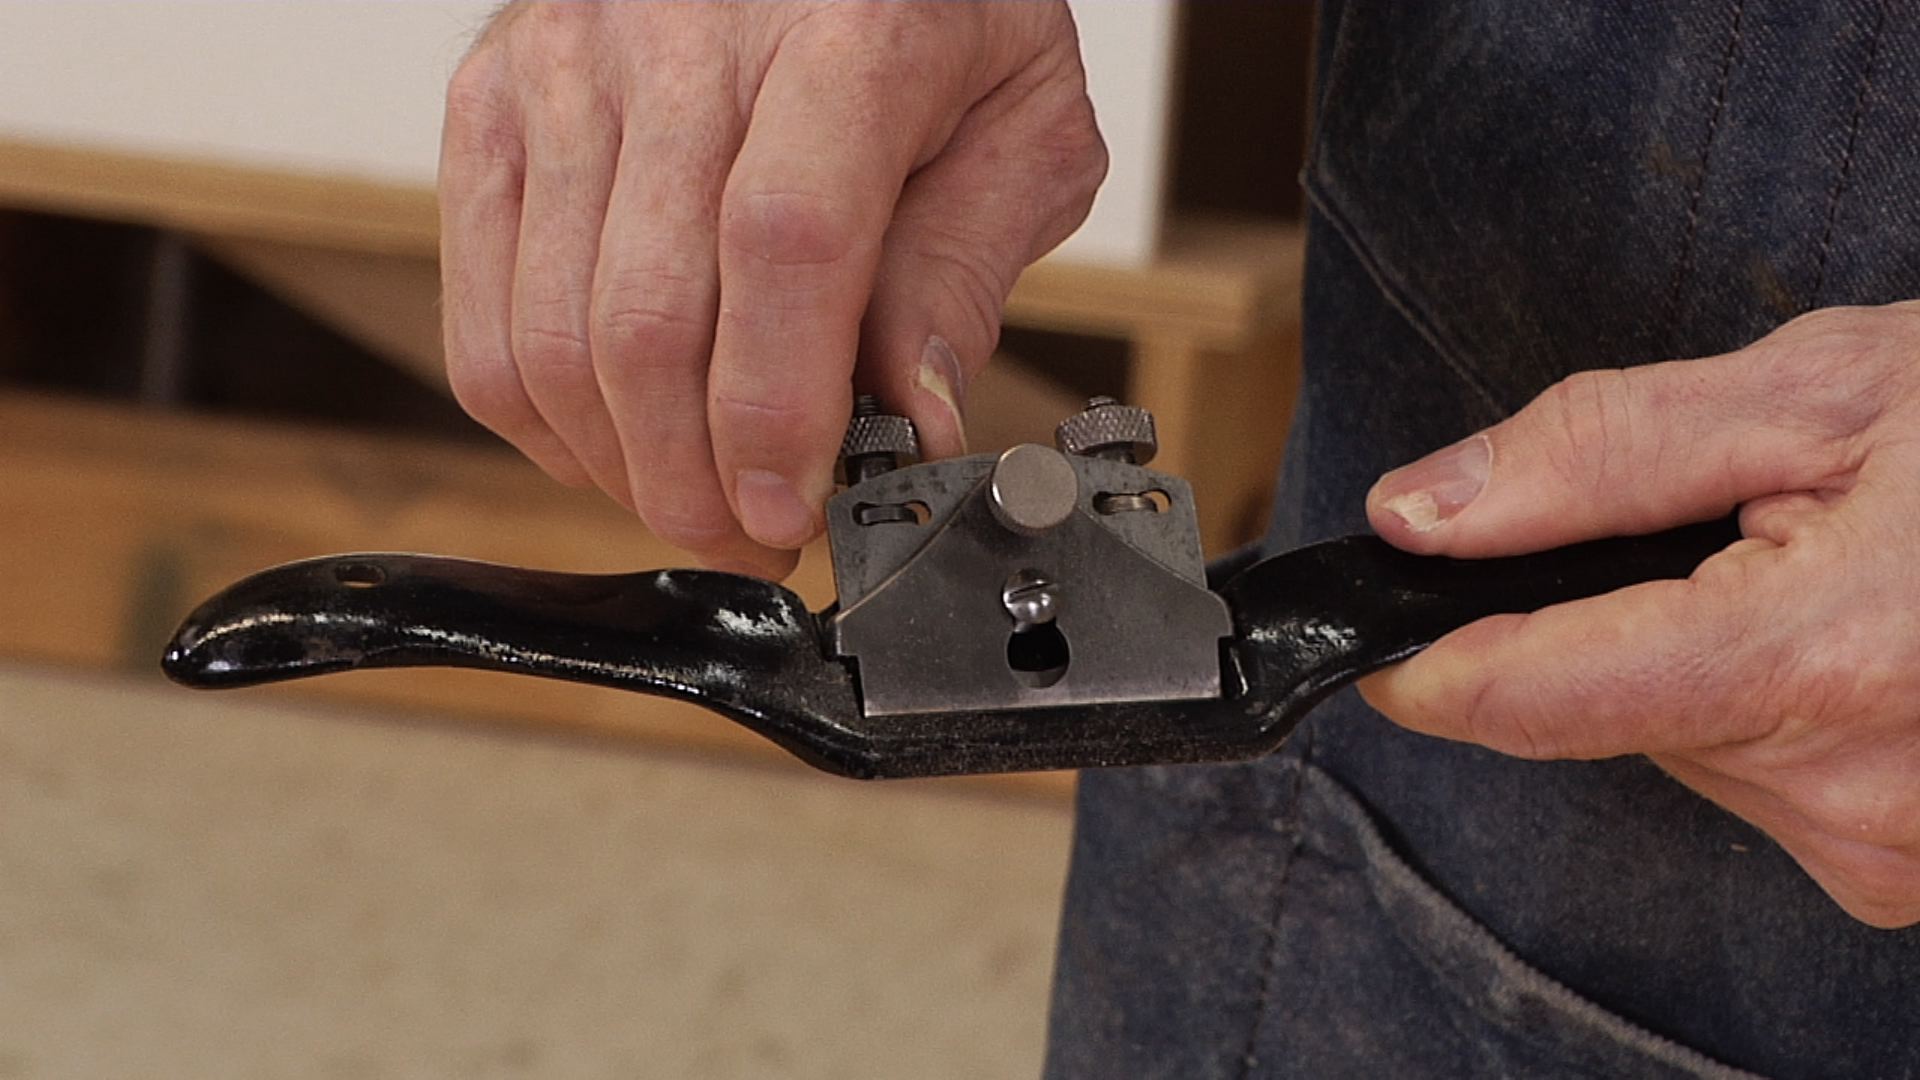 Setting up a spokeshave